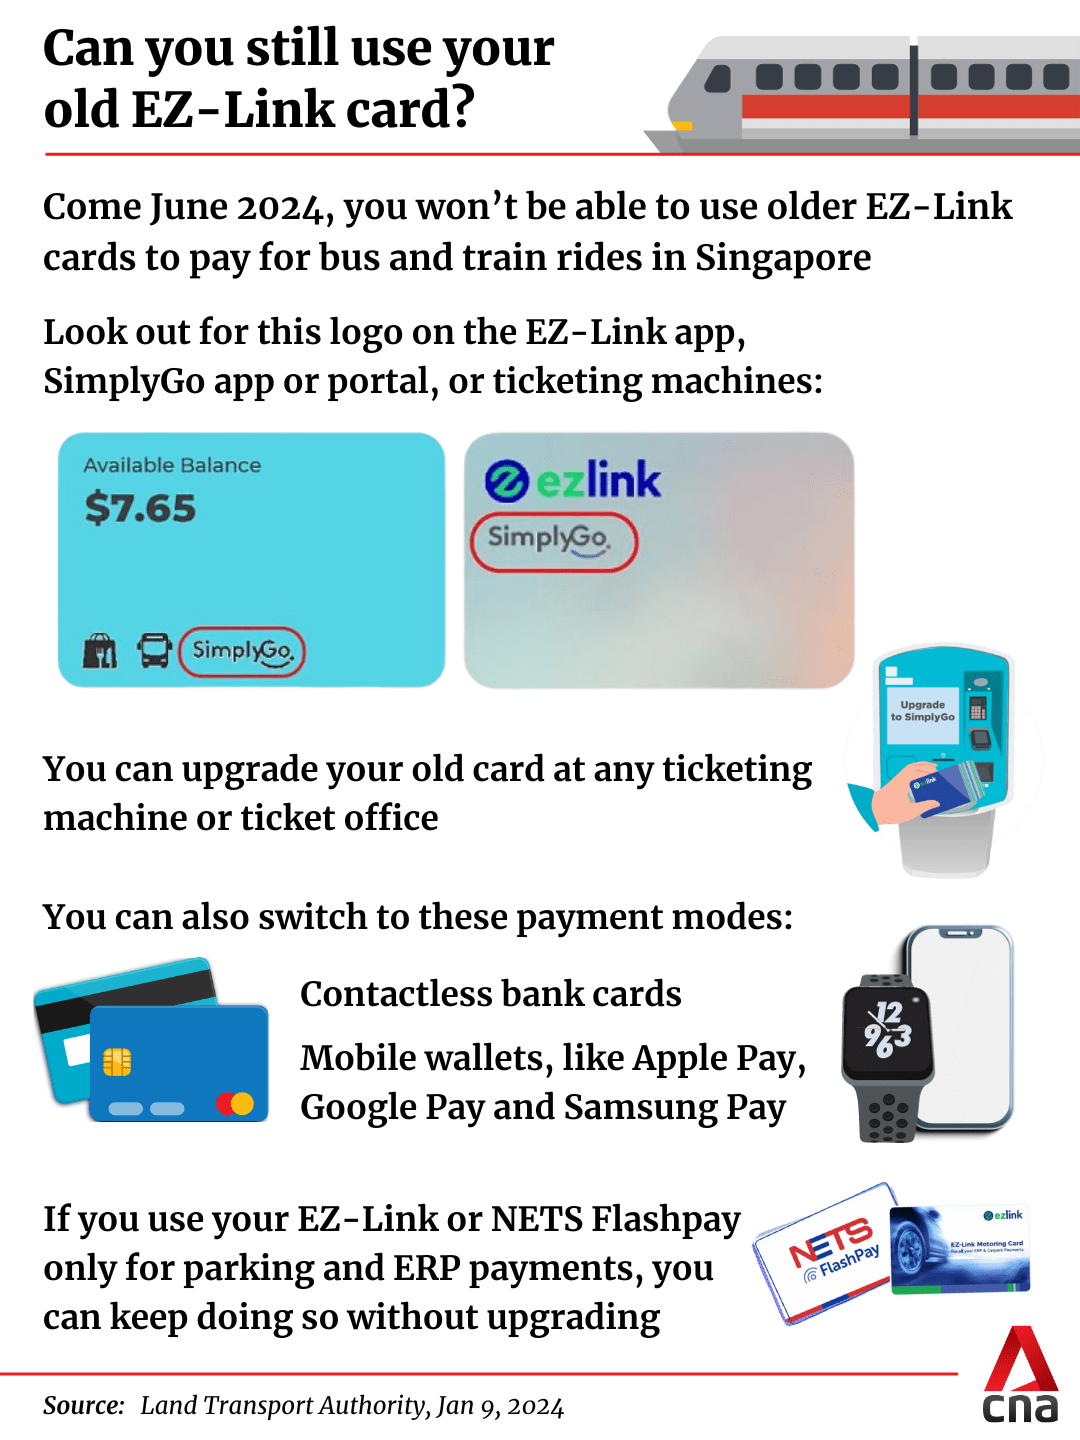 Free NETS FlashPay card exchange at SimplyGo ticket offices